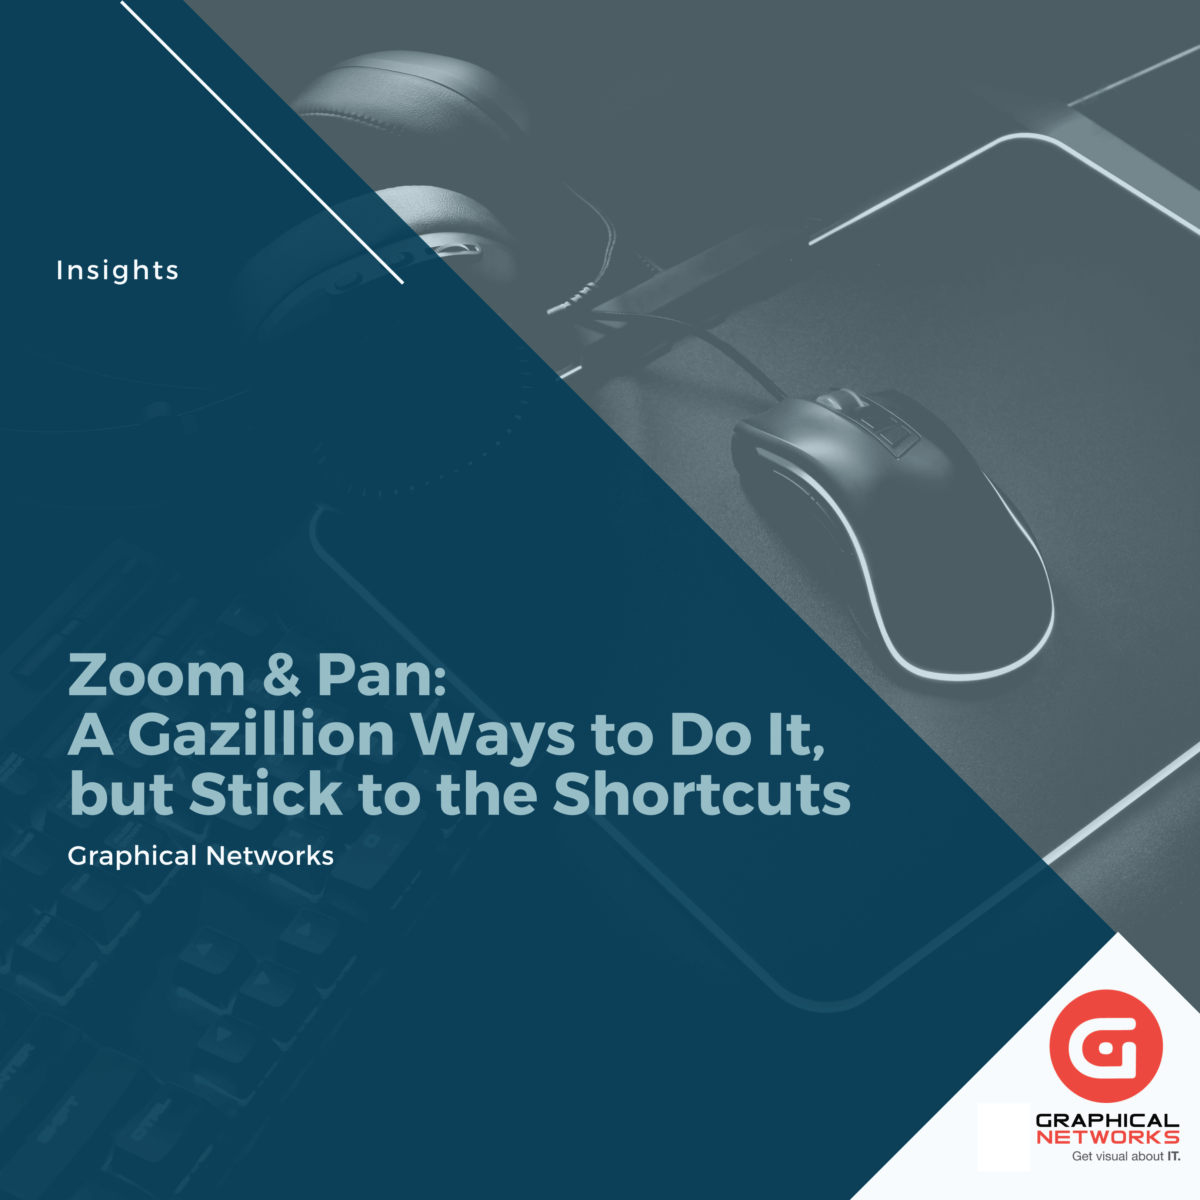 Zoom & Pan: a Gazillion Ways to Do It, but Stick to the Shortcuts!